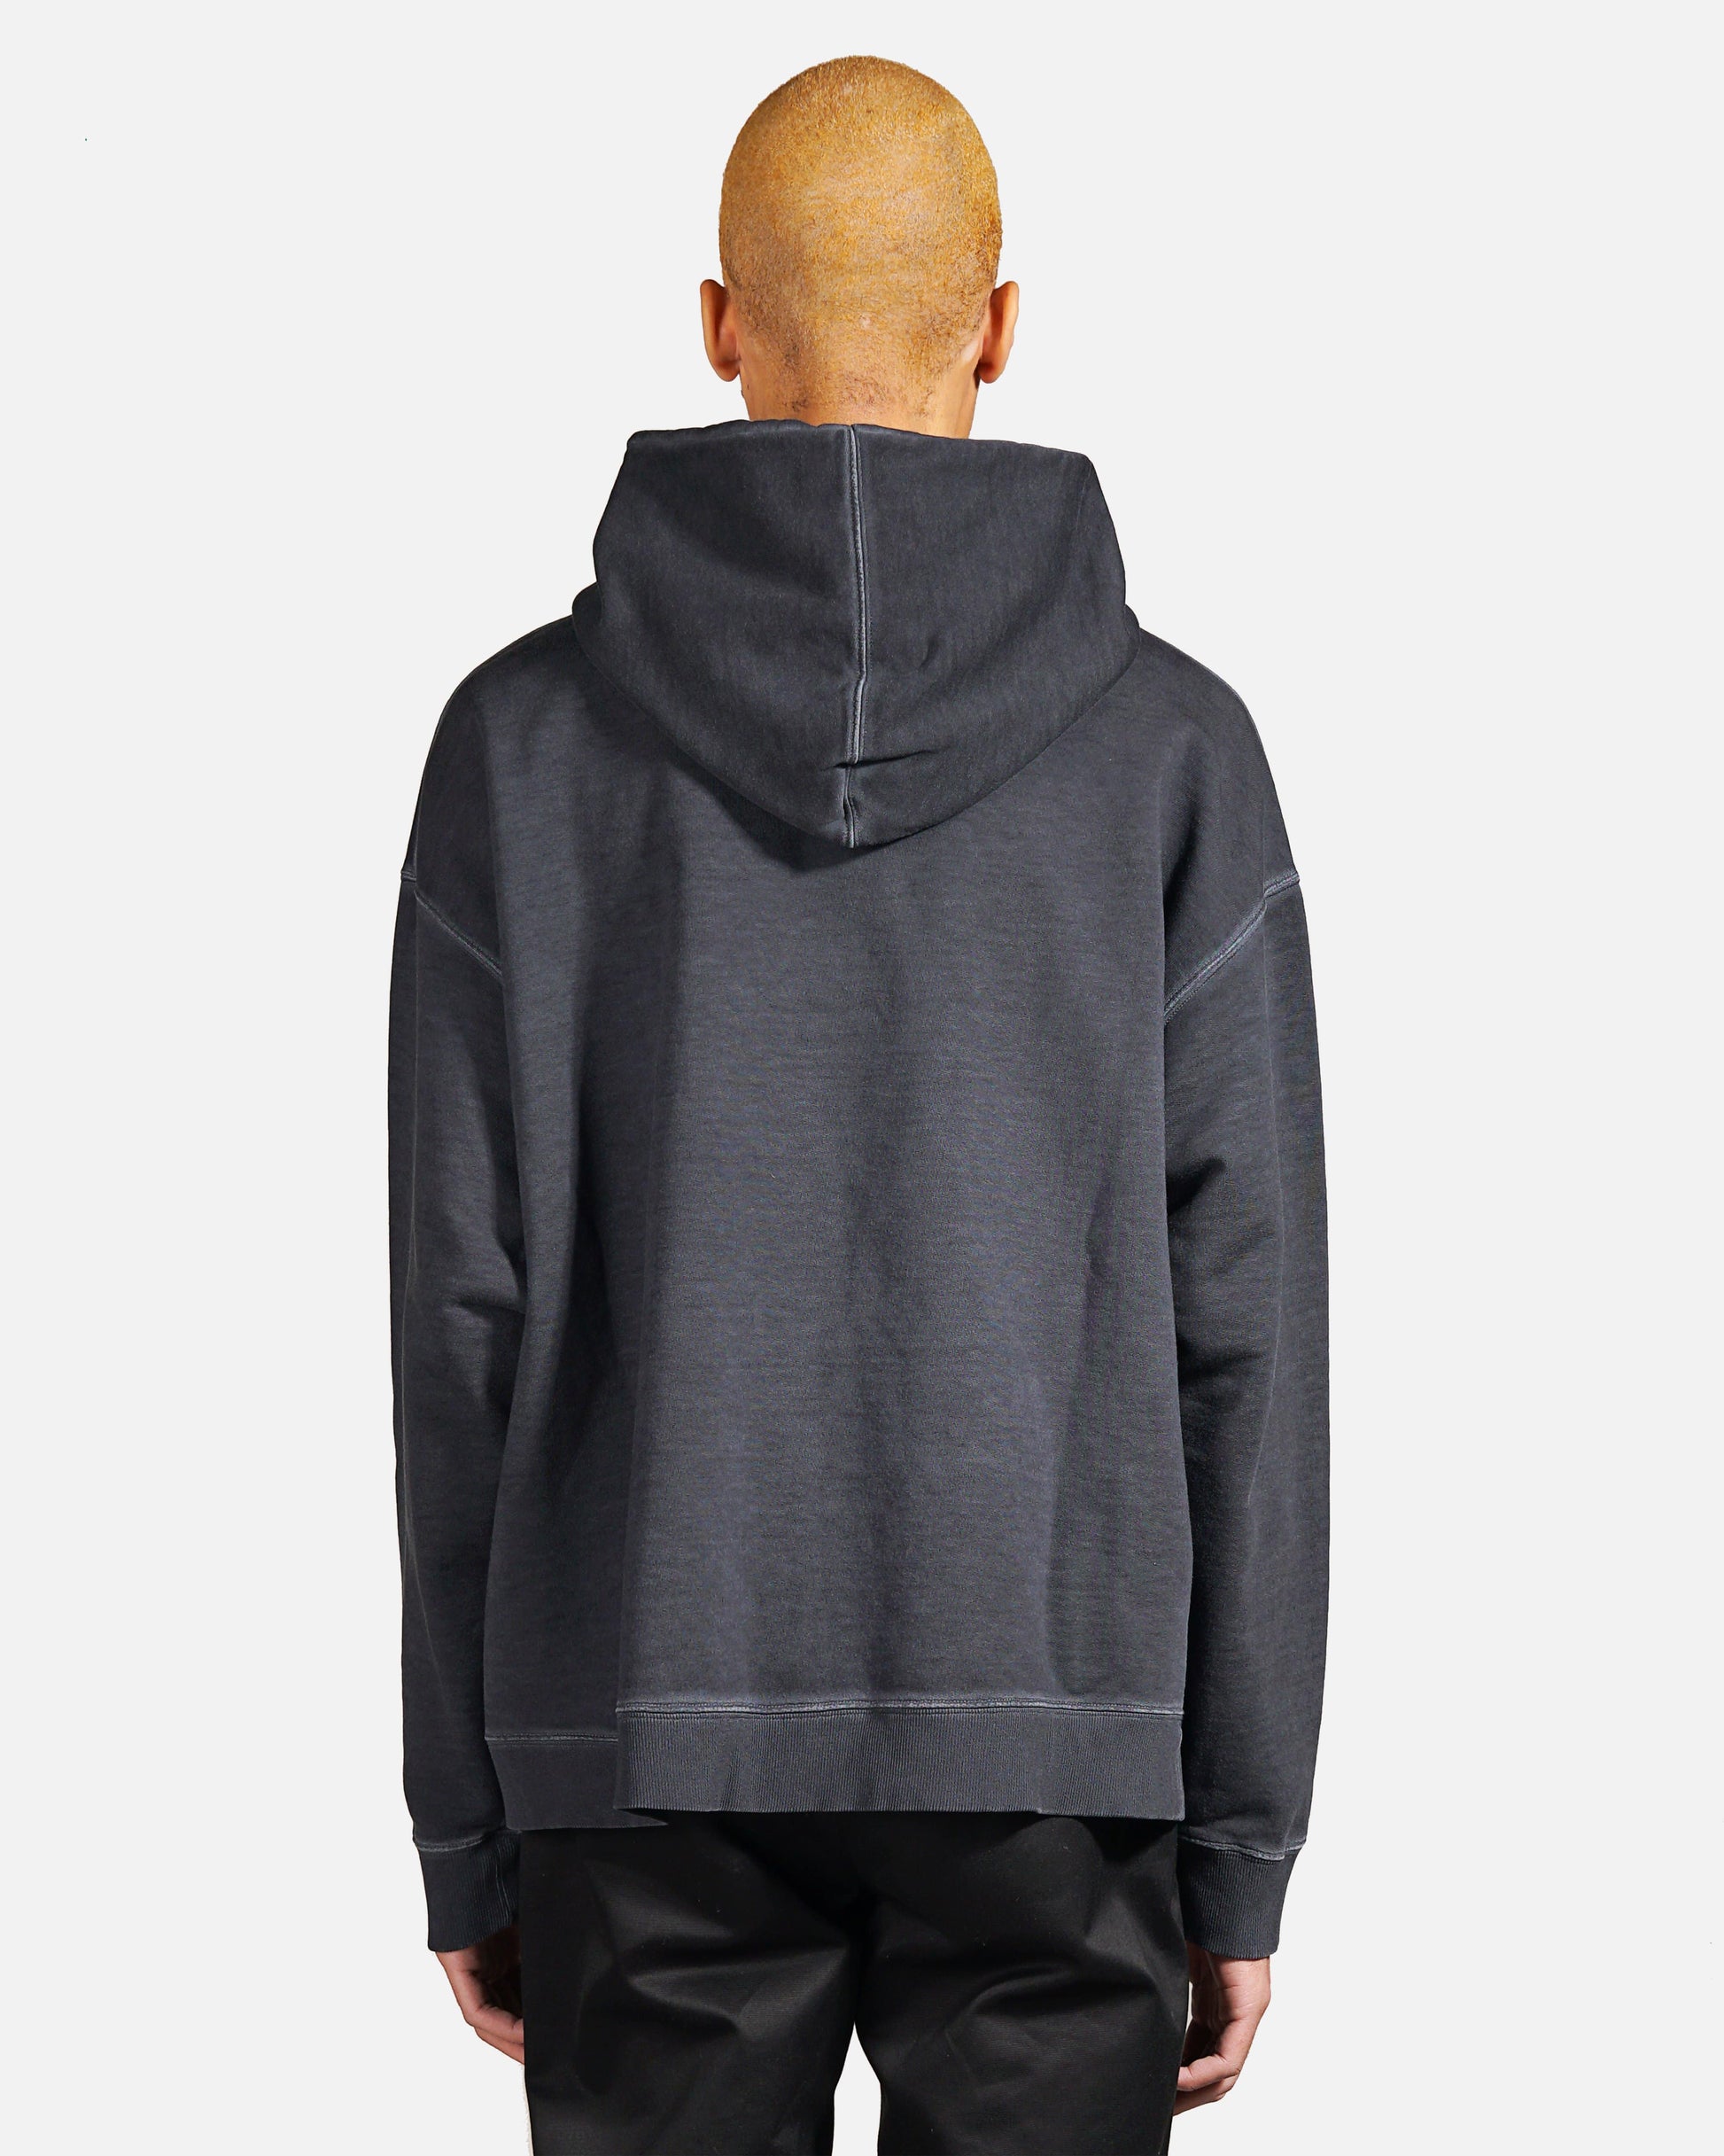 Maison Margiela Men's T-Shirts Silhouette Print Hoodie in Anthracite